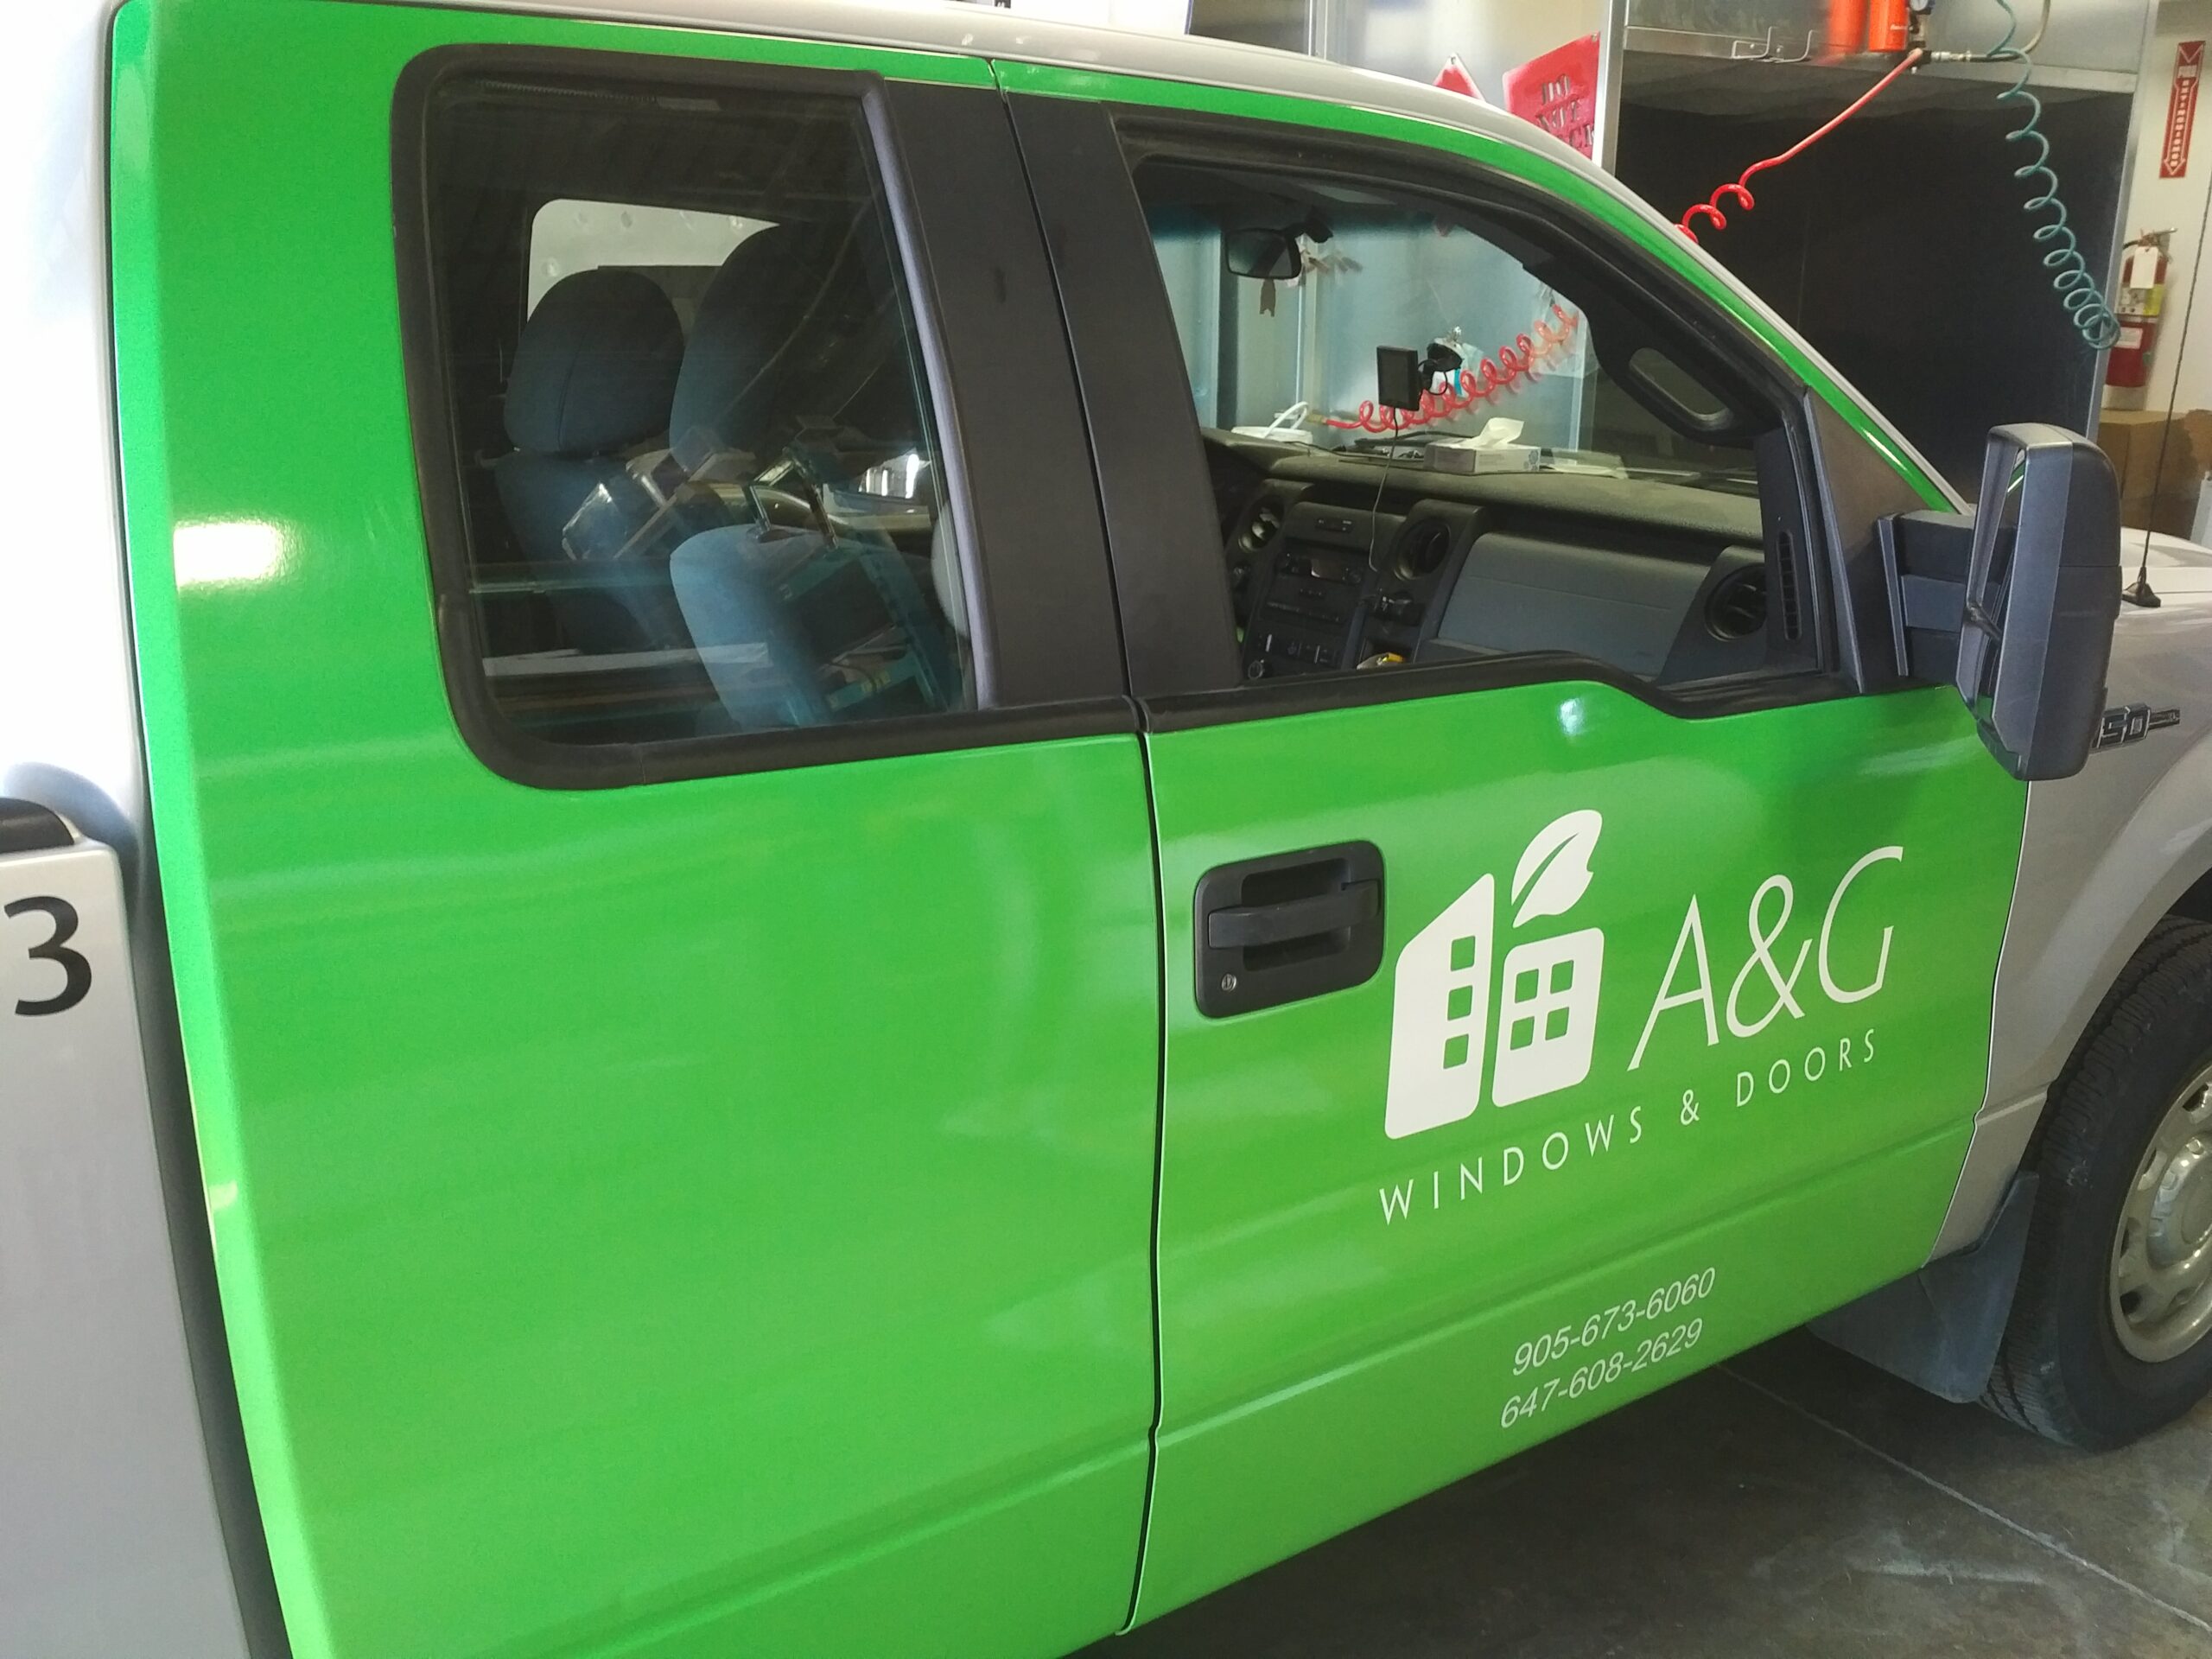 A and G Windows and Doors Graphic on a Pickup